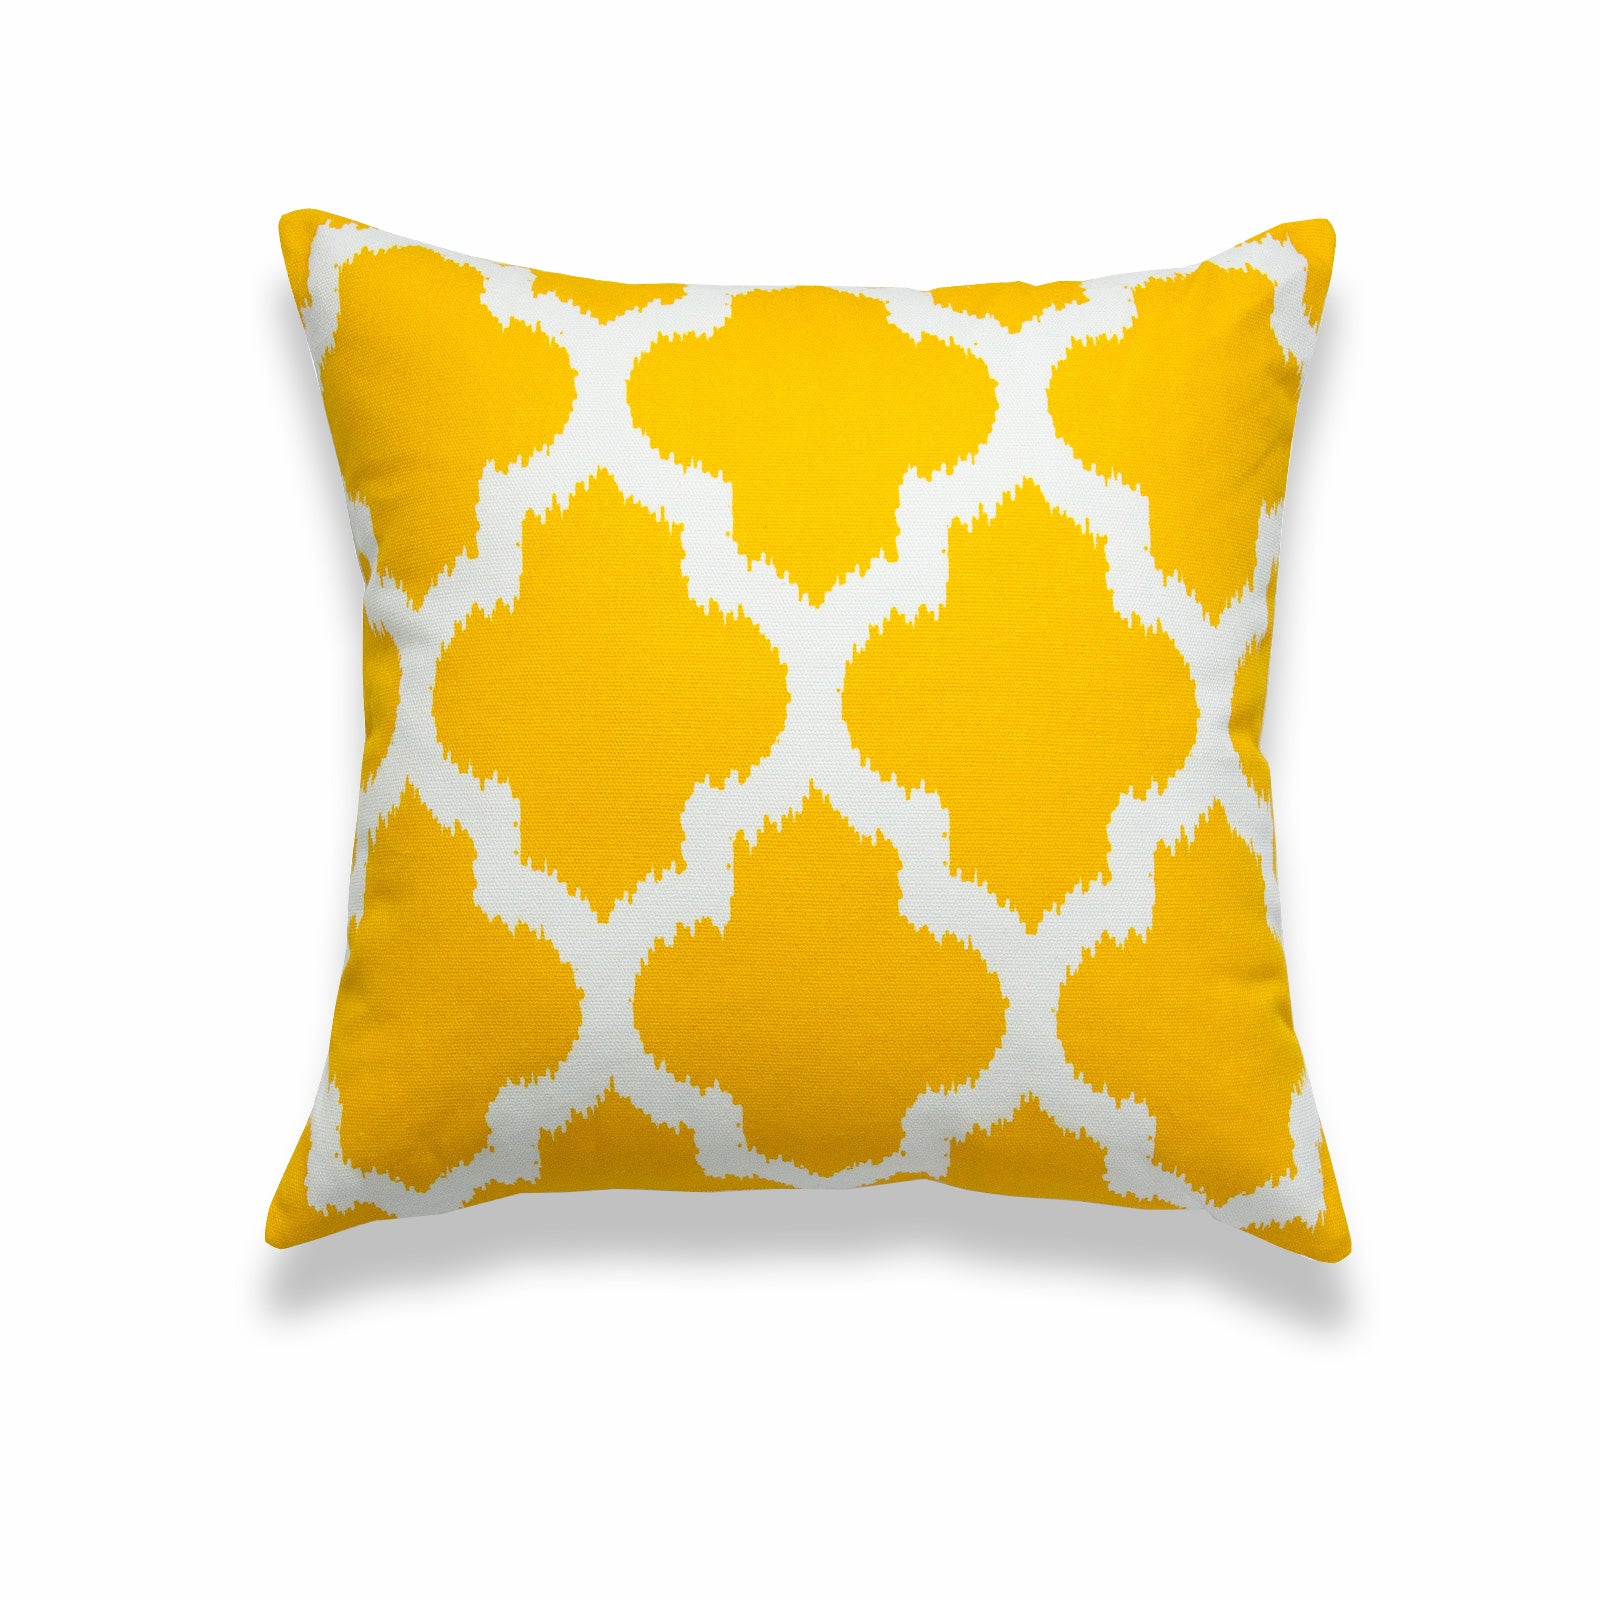 Ikat Inspired Pillow Cover, Moroccan Quatrefoil, Yellow White , 18"x18"